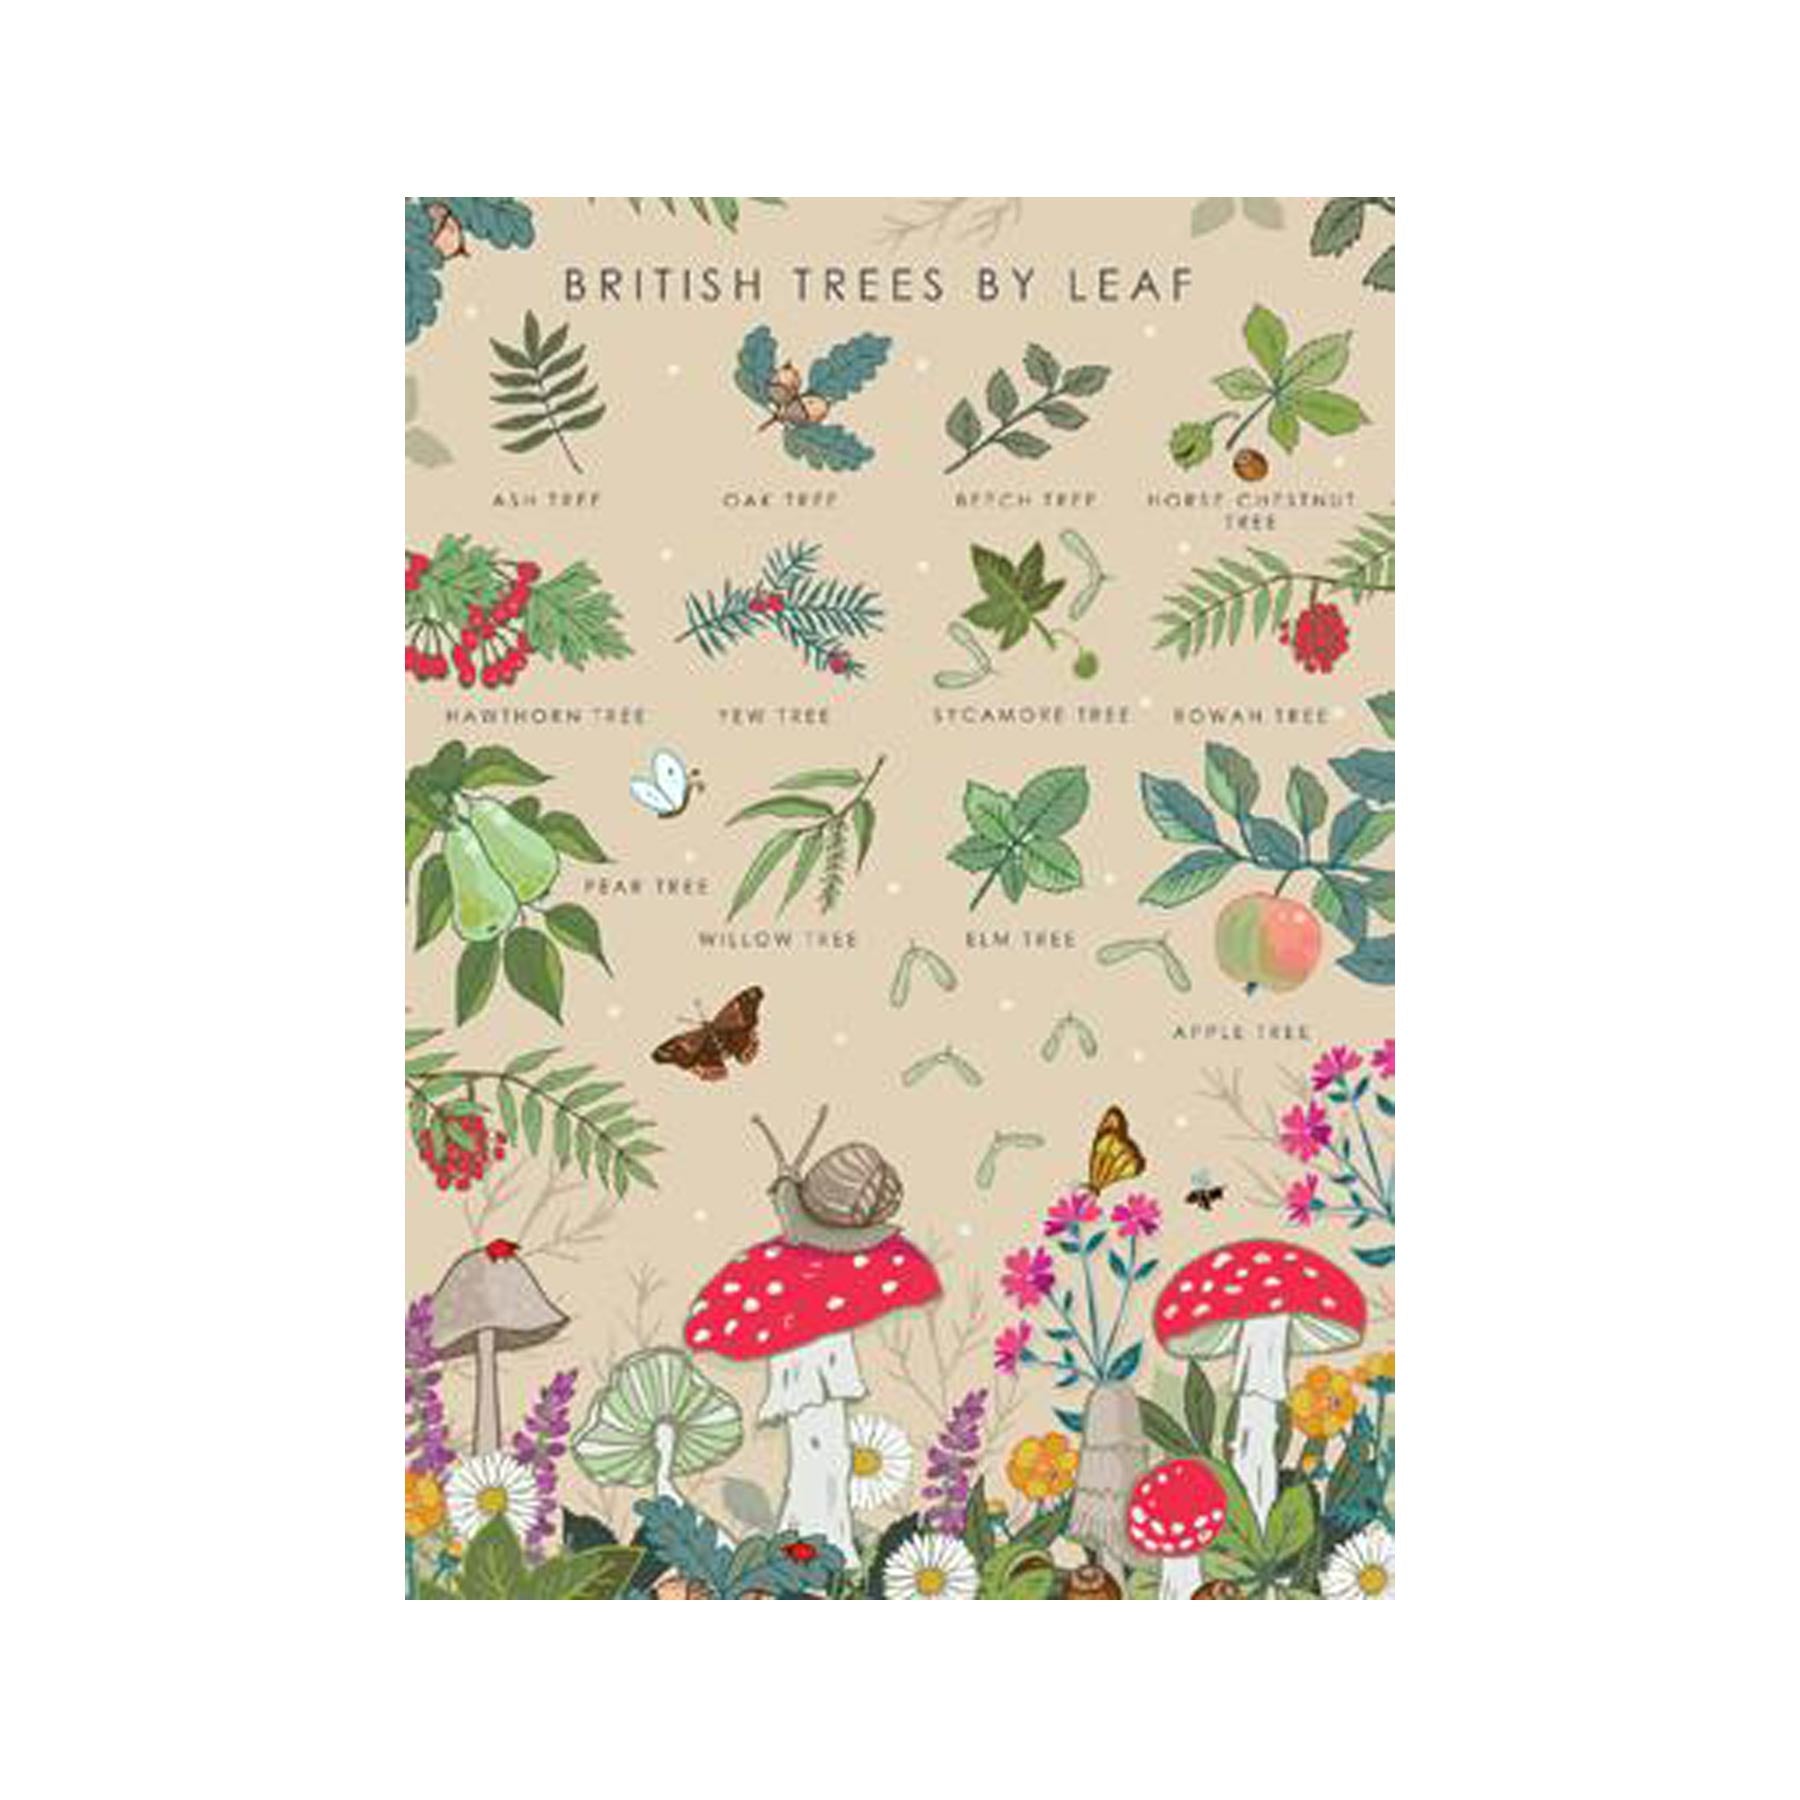 British trees by leaf nature guide greetings card